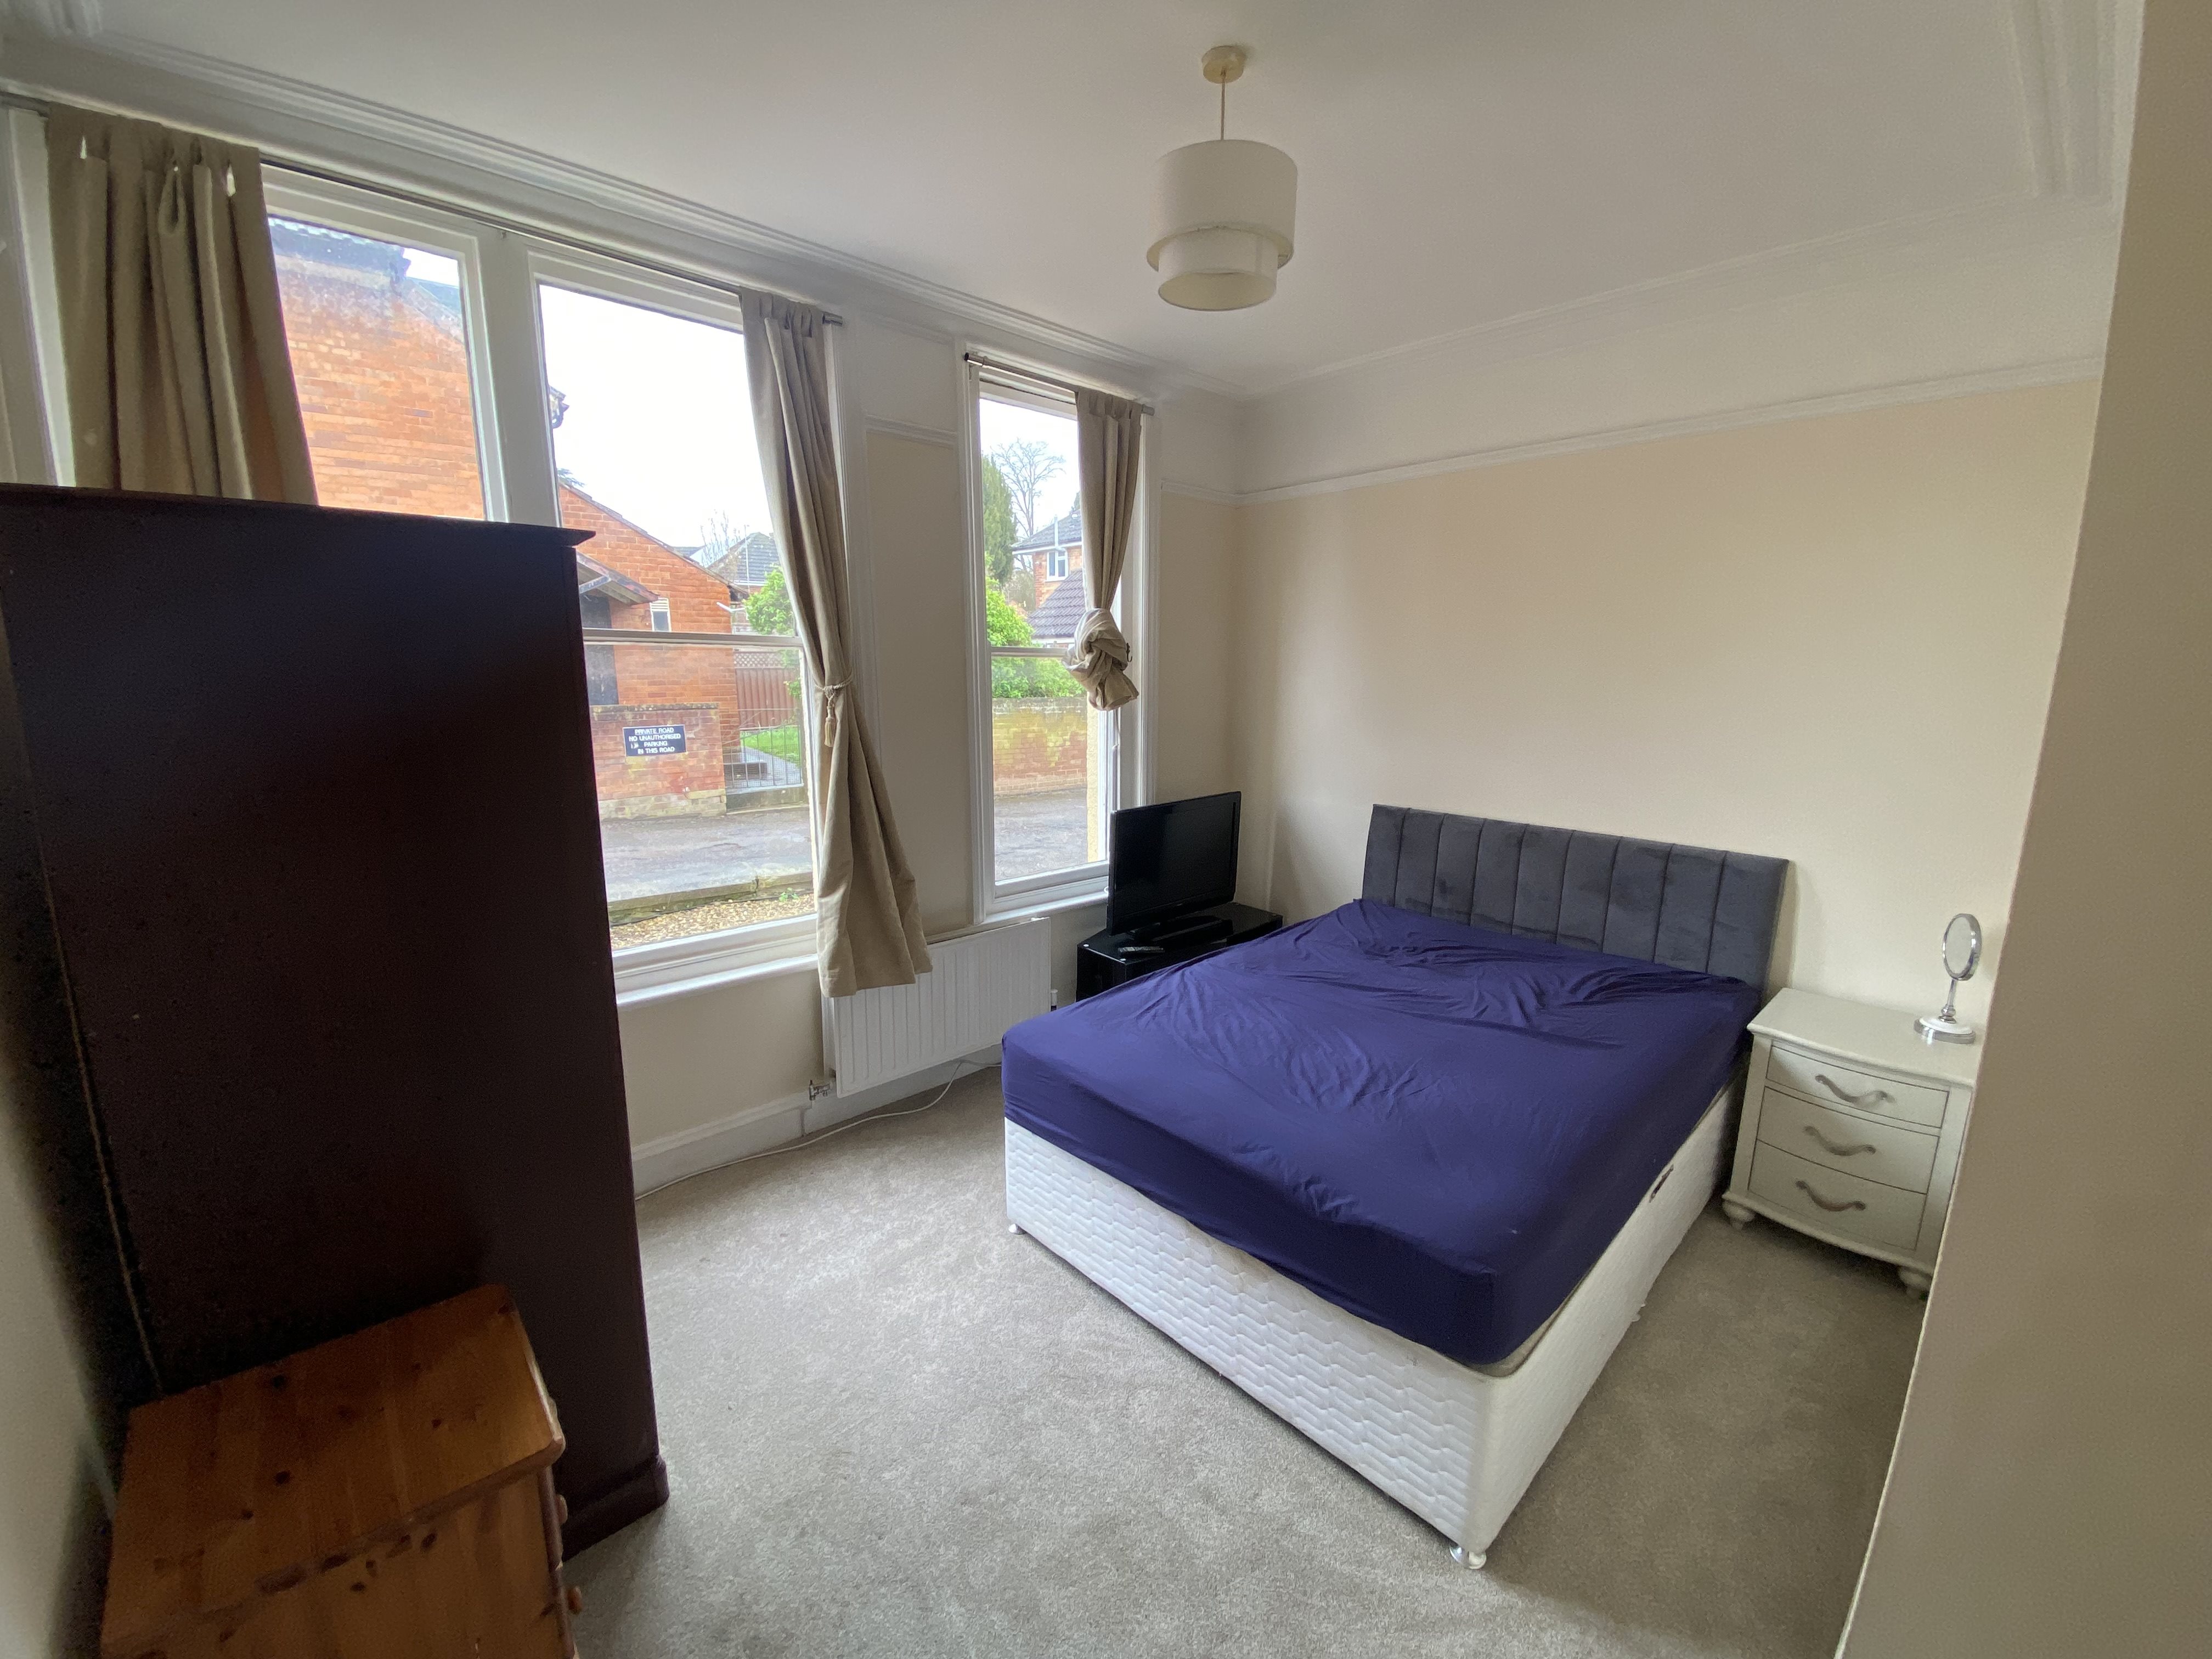 1 bed house / flat share to rent in Belvedere Road - Property Image 1